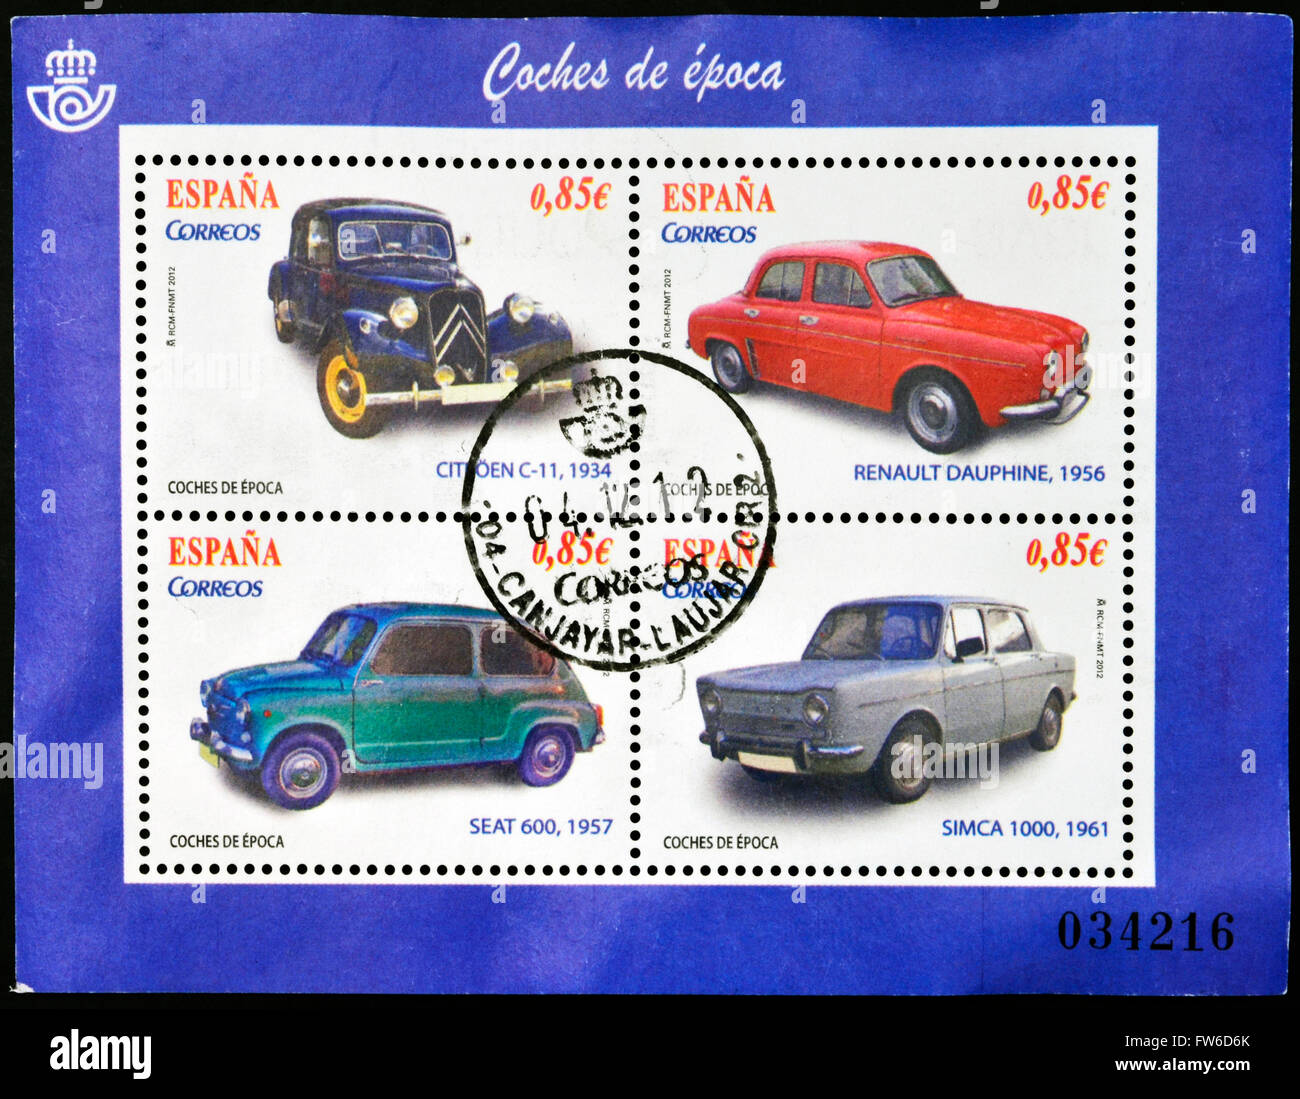 SPAIN - CIRCA 2012: Stamps printed in Spain shows vintage car, circa 2012 Stock Photo